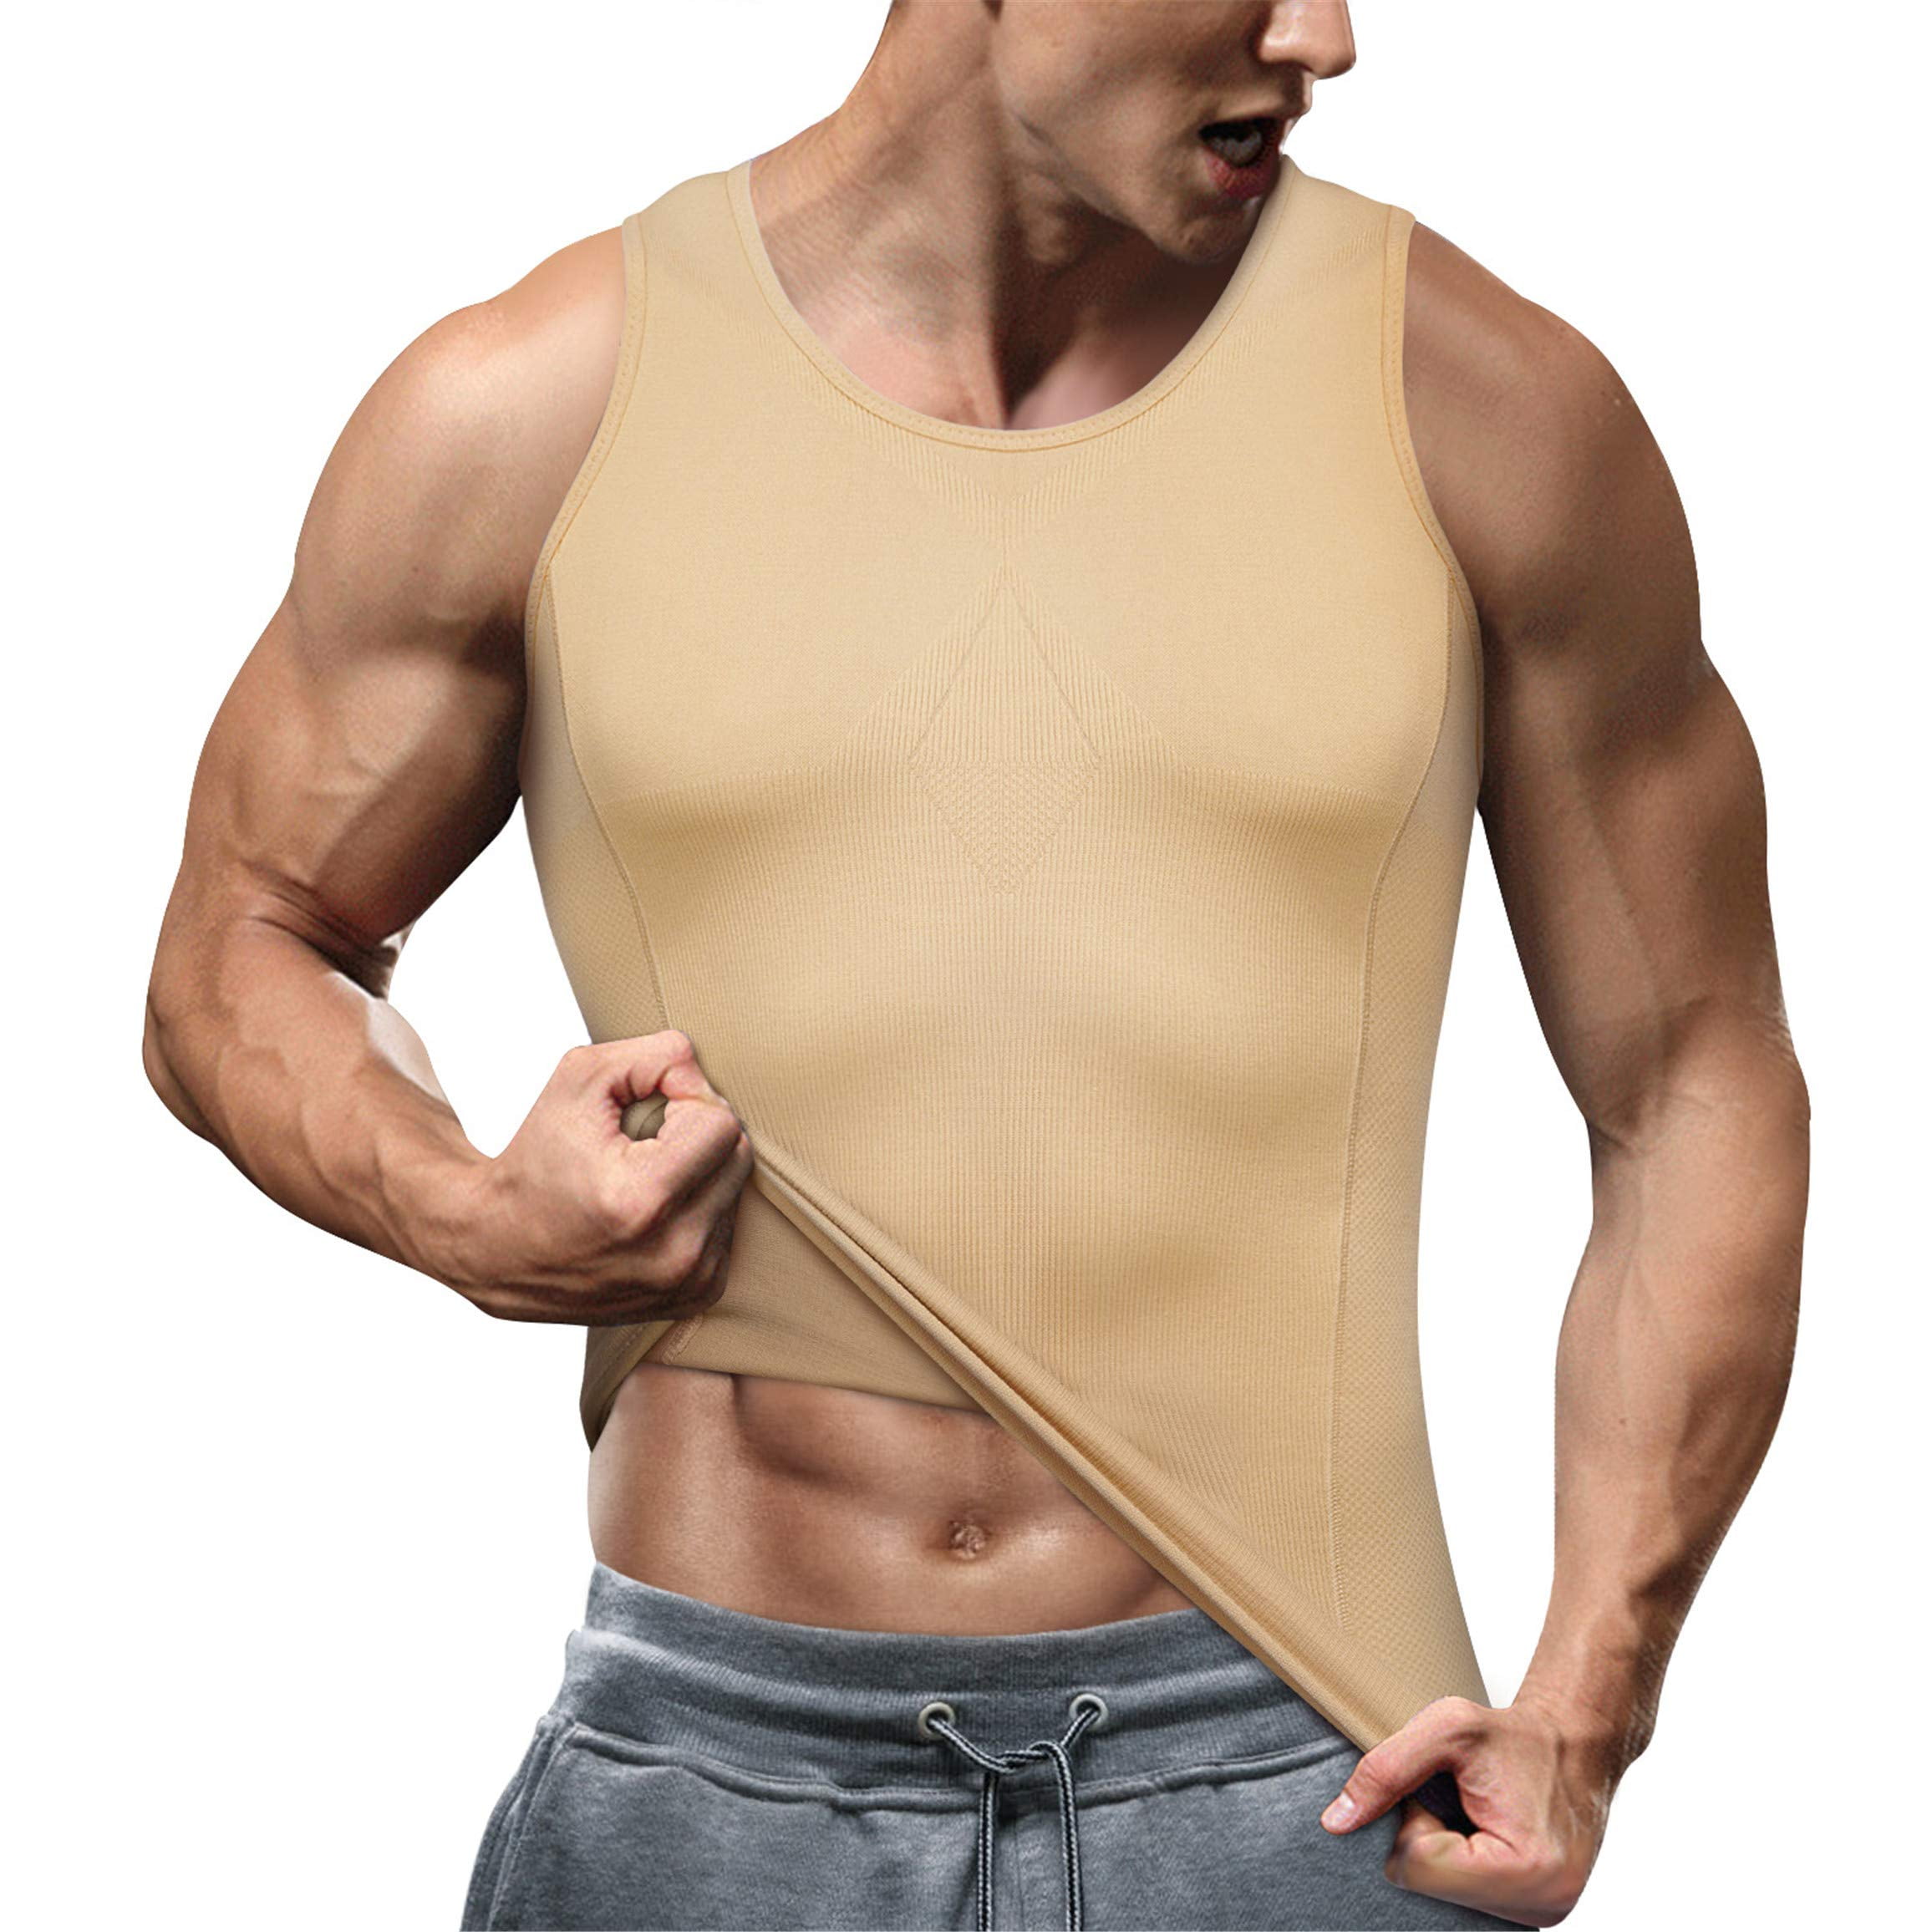 TAILONG Men Compression Shirt for Body Slimming Tank Top Shaper Tight  Undershirt Tummy Control Girdle, Beige, L price in UAE,  UAE